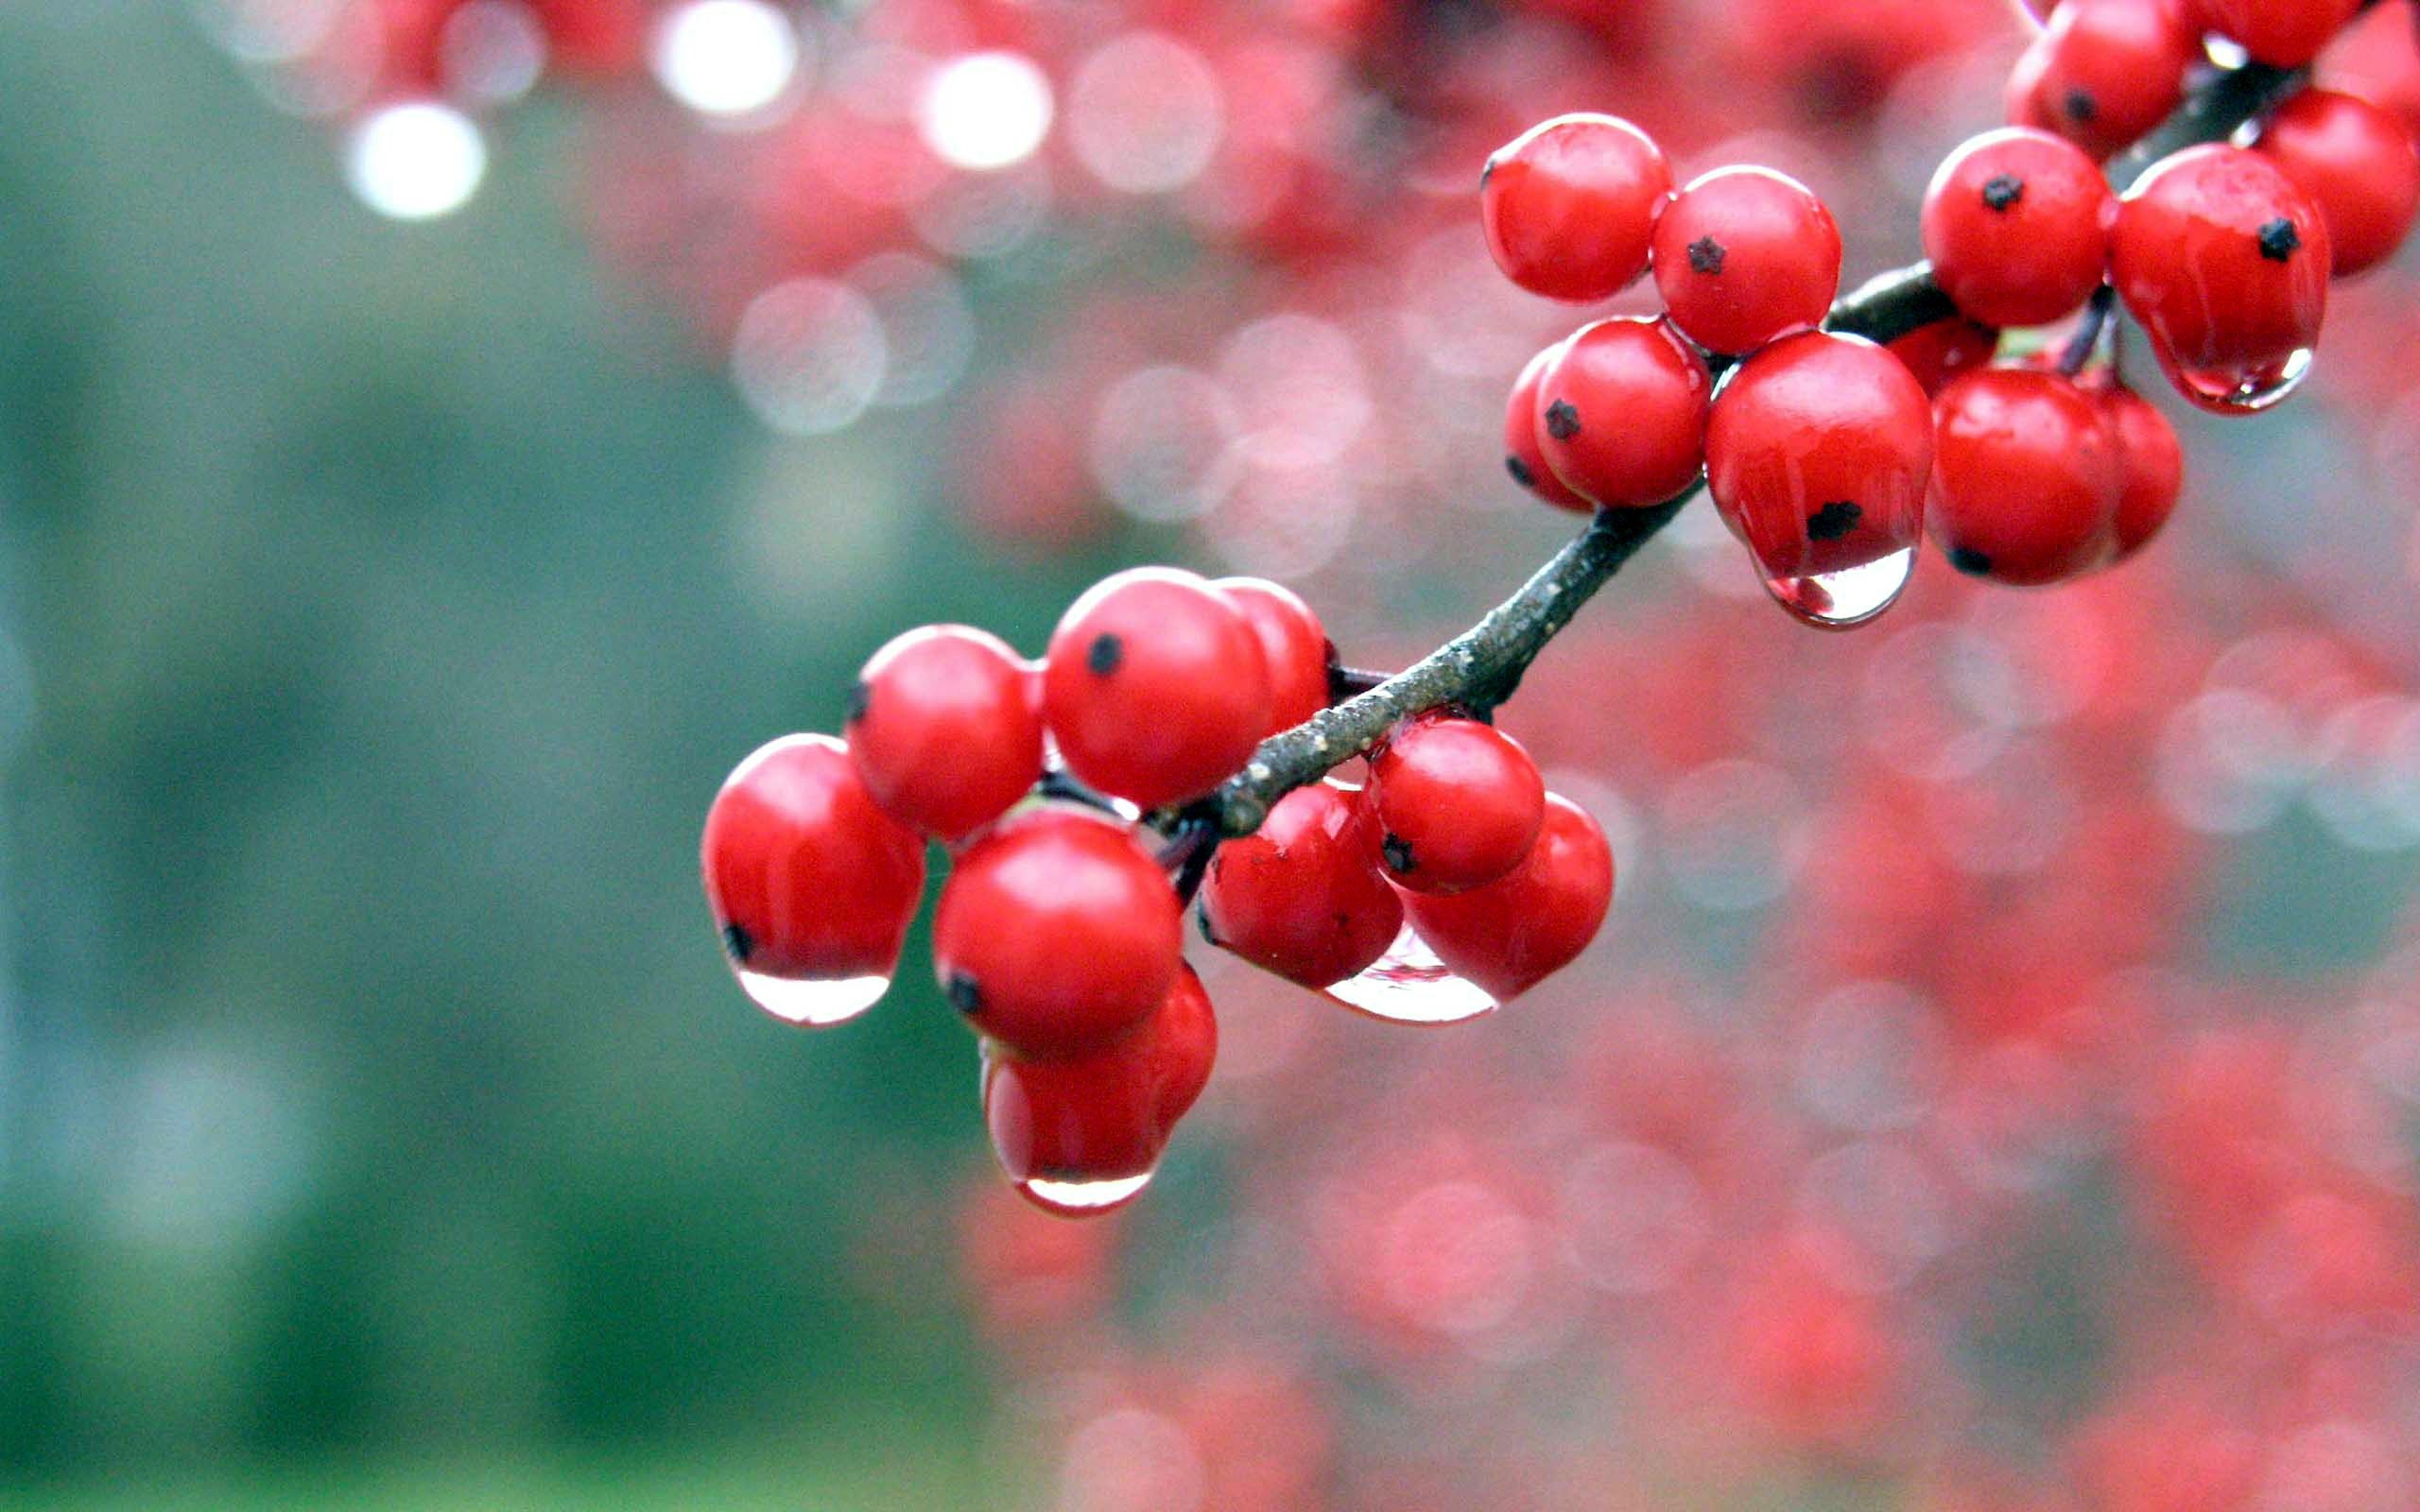 Red berries wallpapers | Red berries stock photos